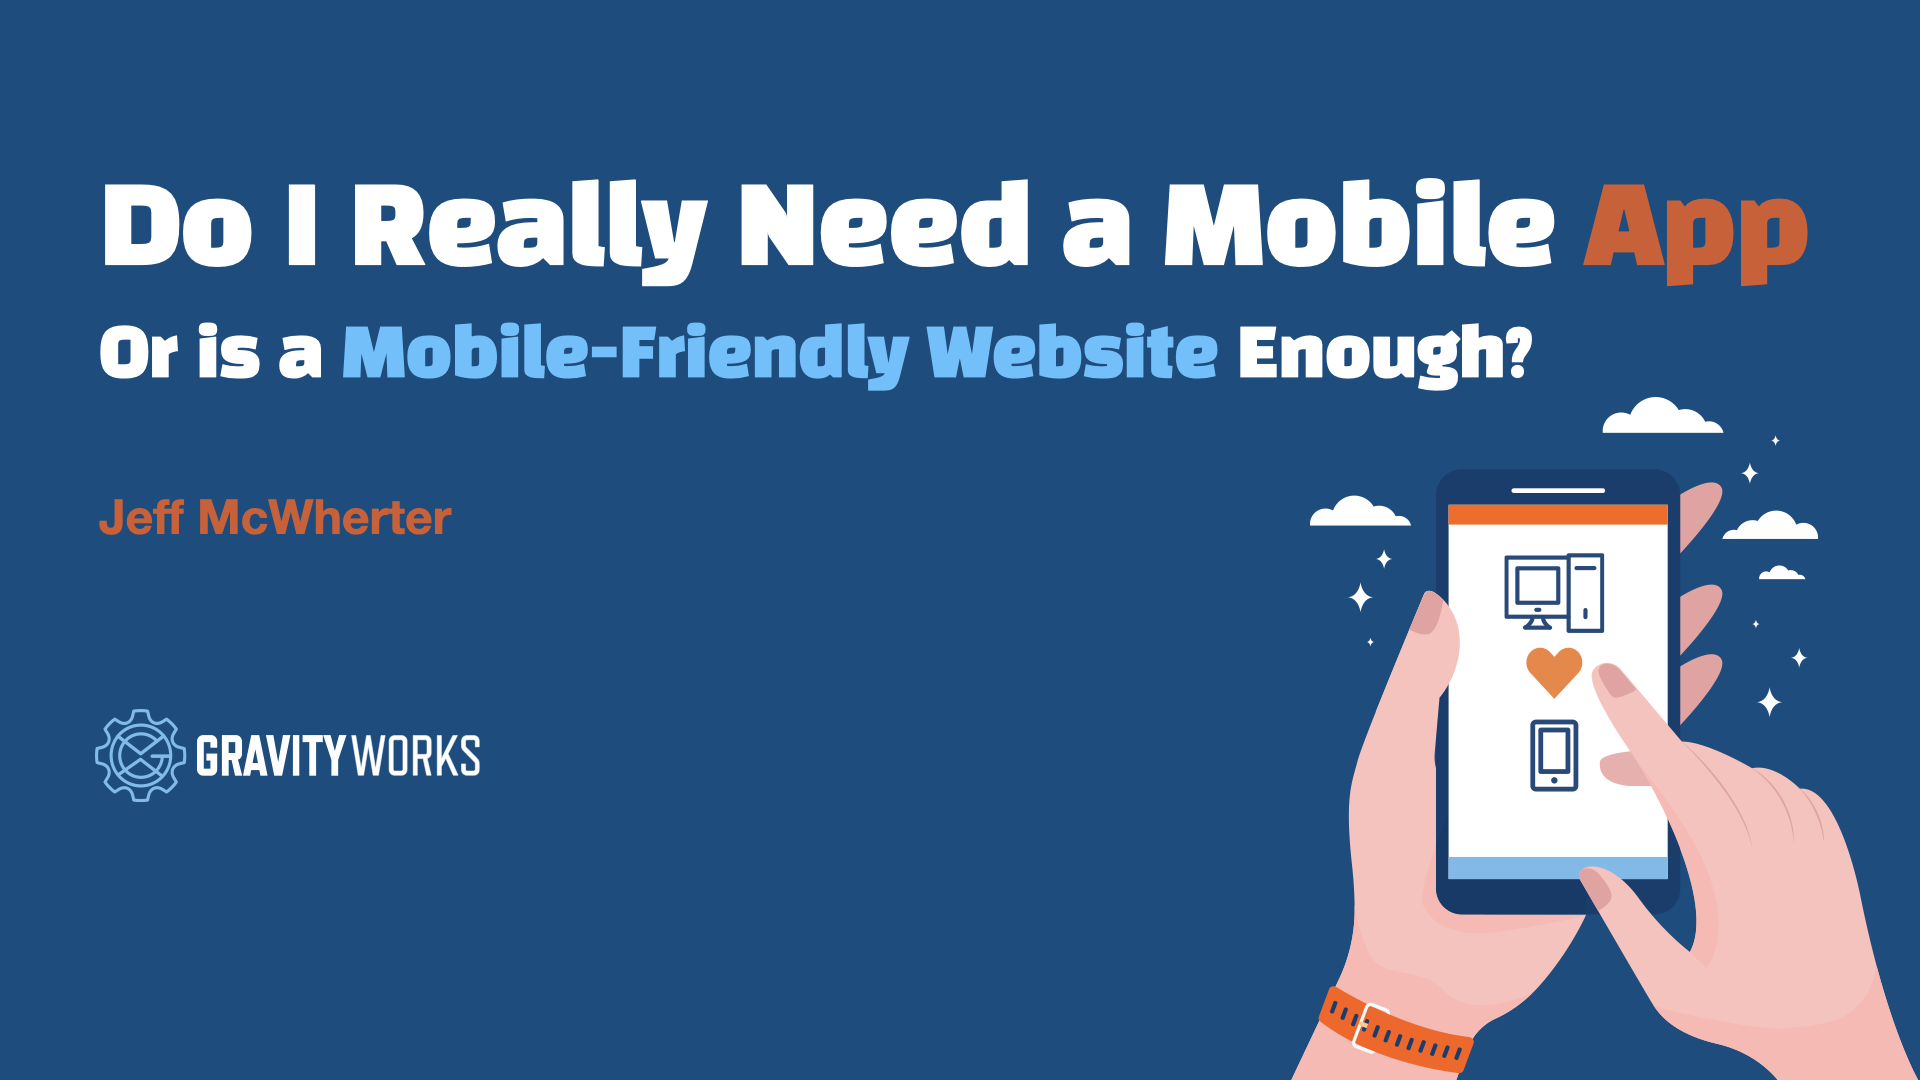 Do I Really Need a Mobile App, or is a Mobile-Friendly Website Enough